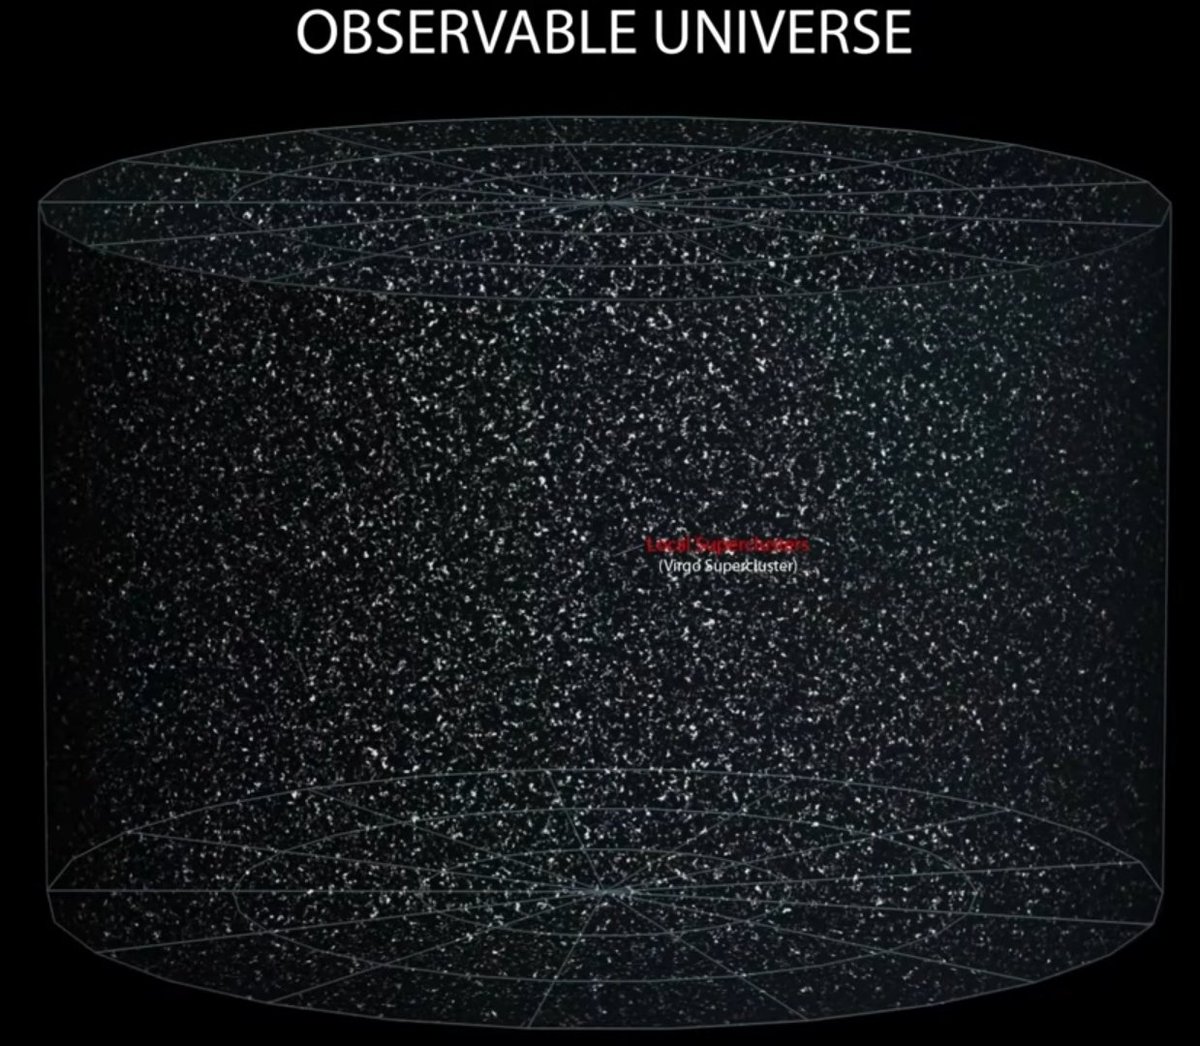 But even that is just a very tiny part of the entire observable universe!It is home to at least 2 TRILLION different galaxies, which together contain more stars than there are grains of sand on our entire planet!The distance from Earth to any side is 46.5 BILLION light years!!